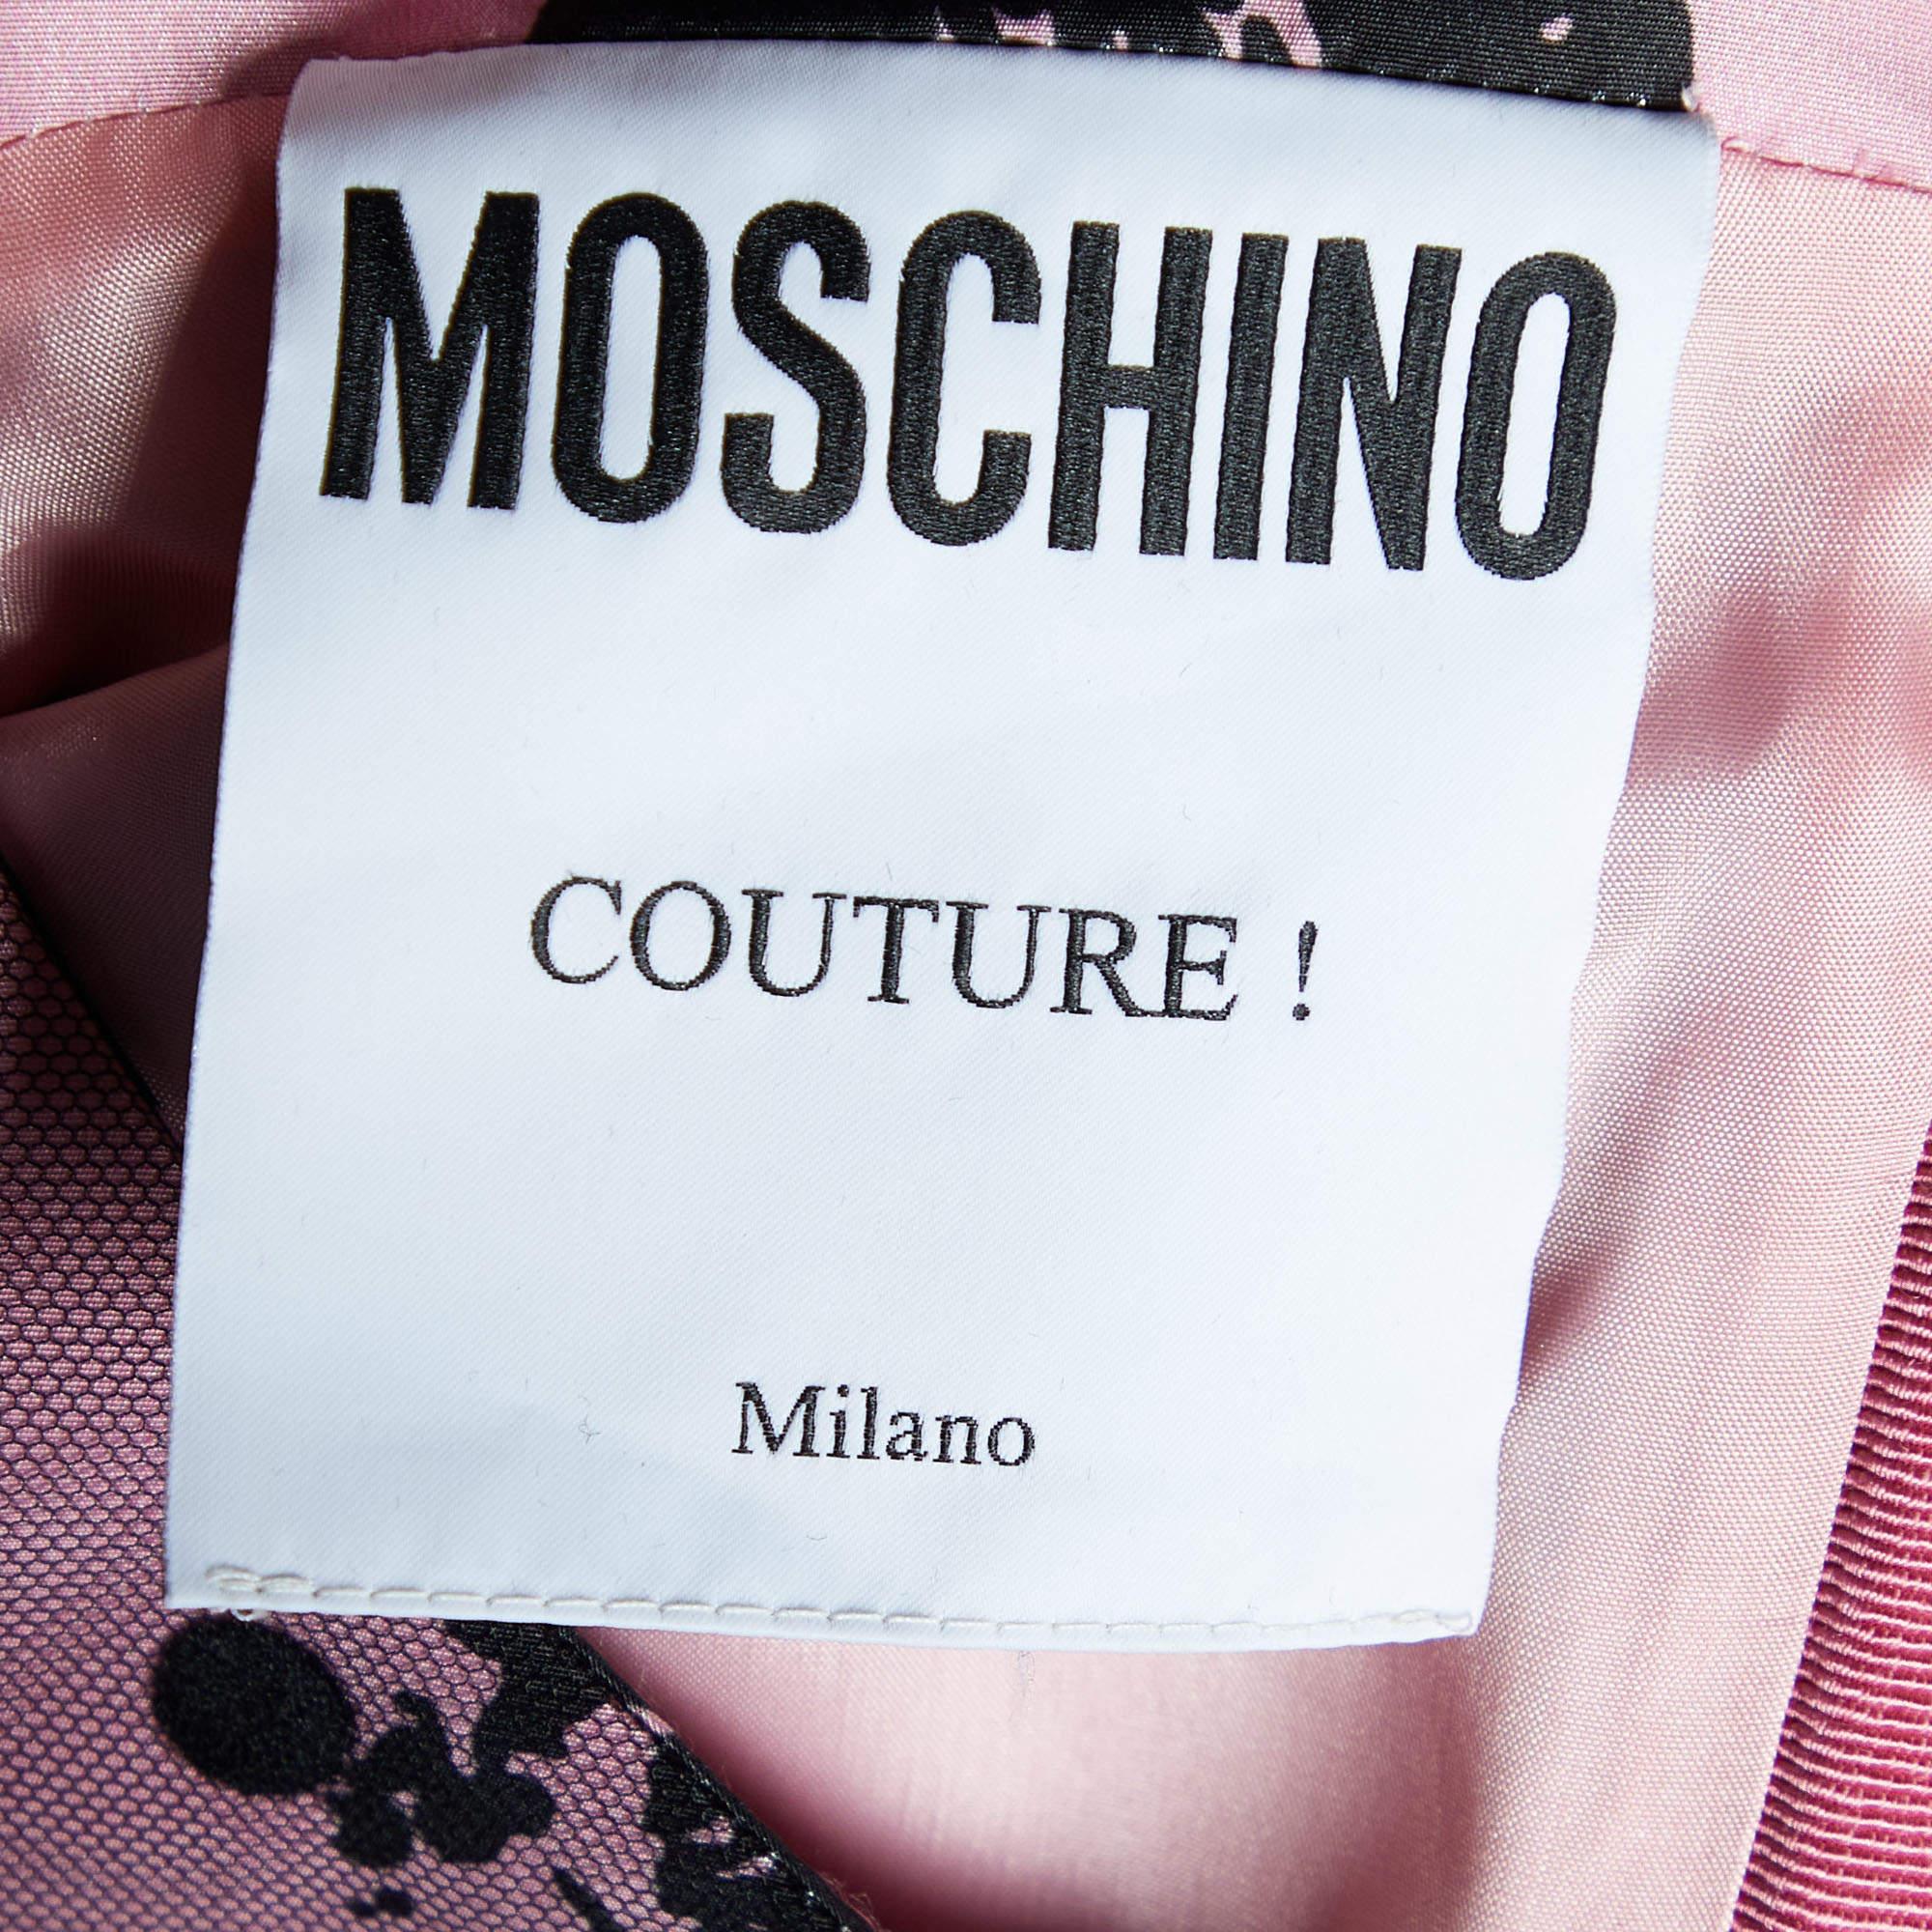 Moschino Couture Pink Printed Satin & Polka Dot Tulle Sleeveless Sheath Dress M In Excellent Condition For Sale In Dubai, Al Qouz 2